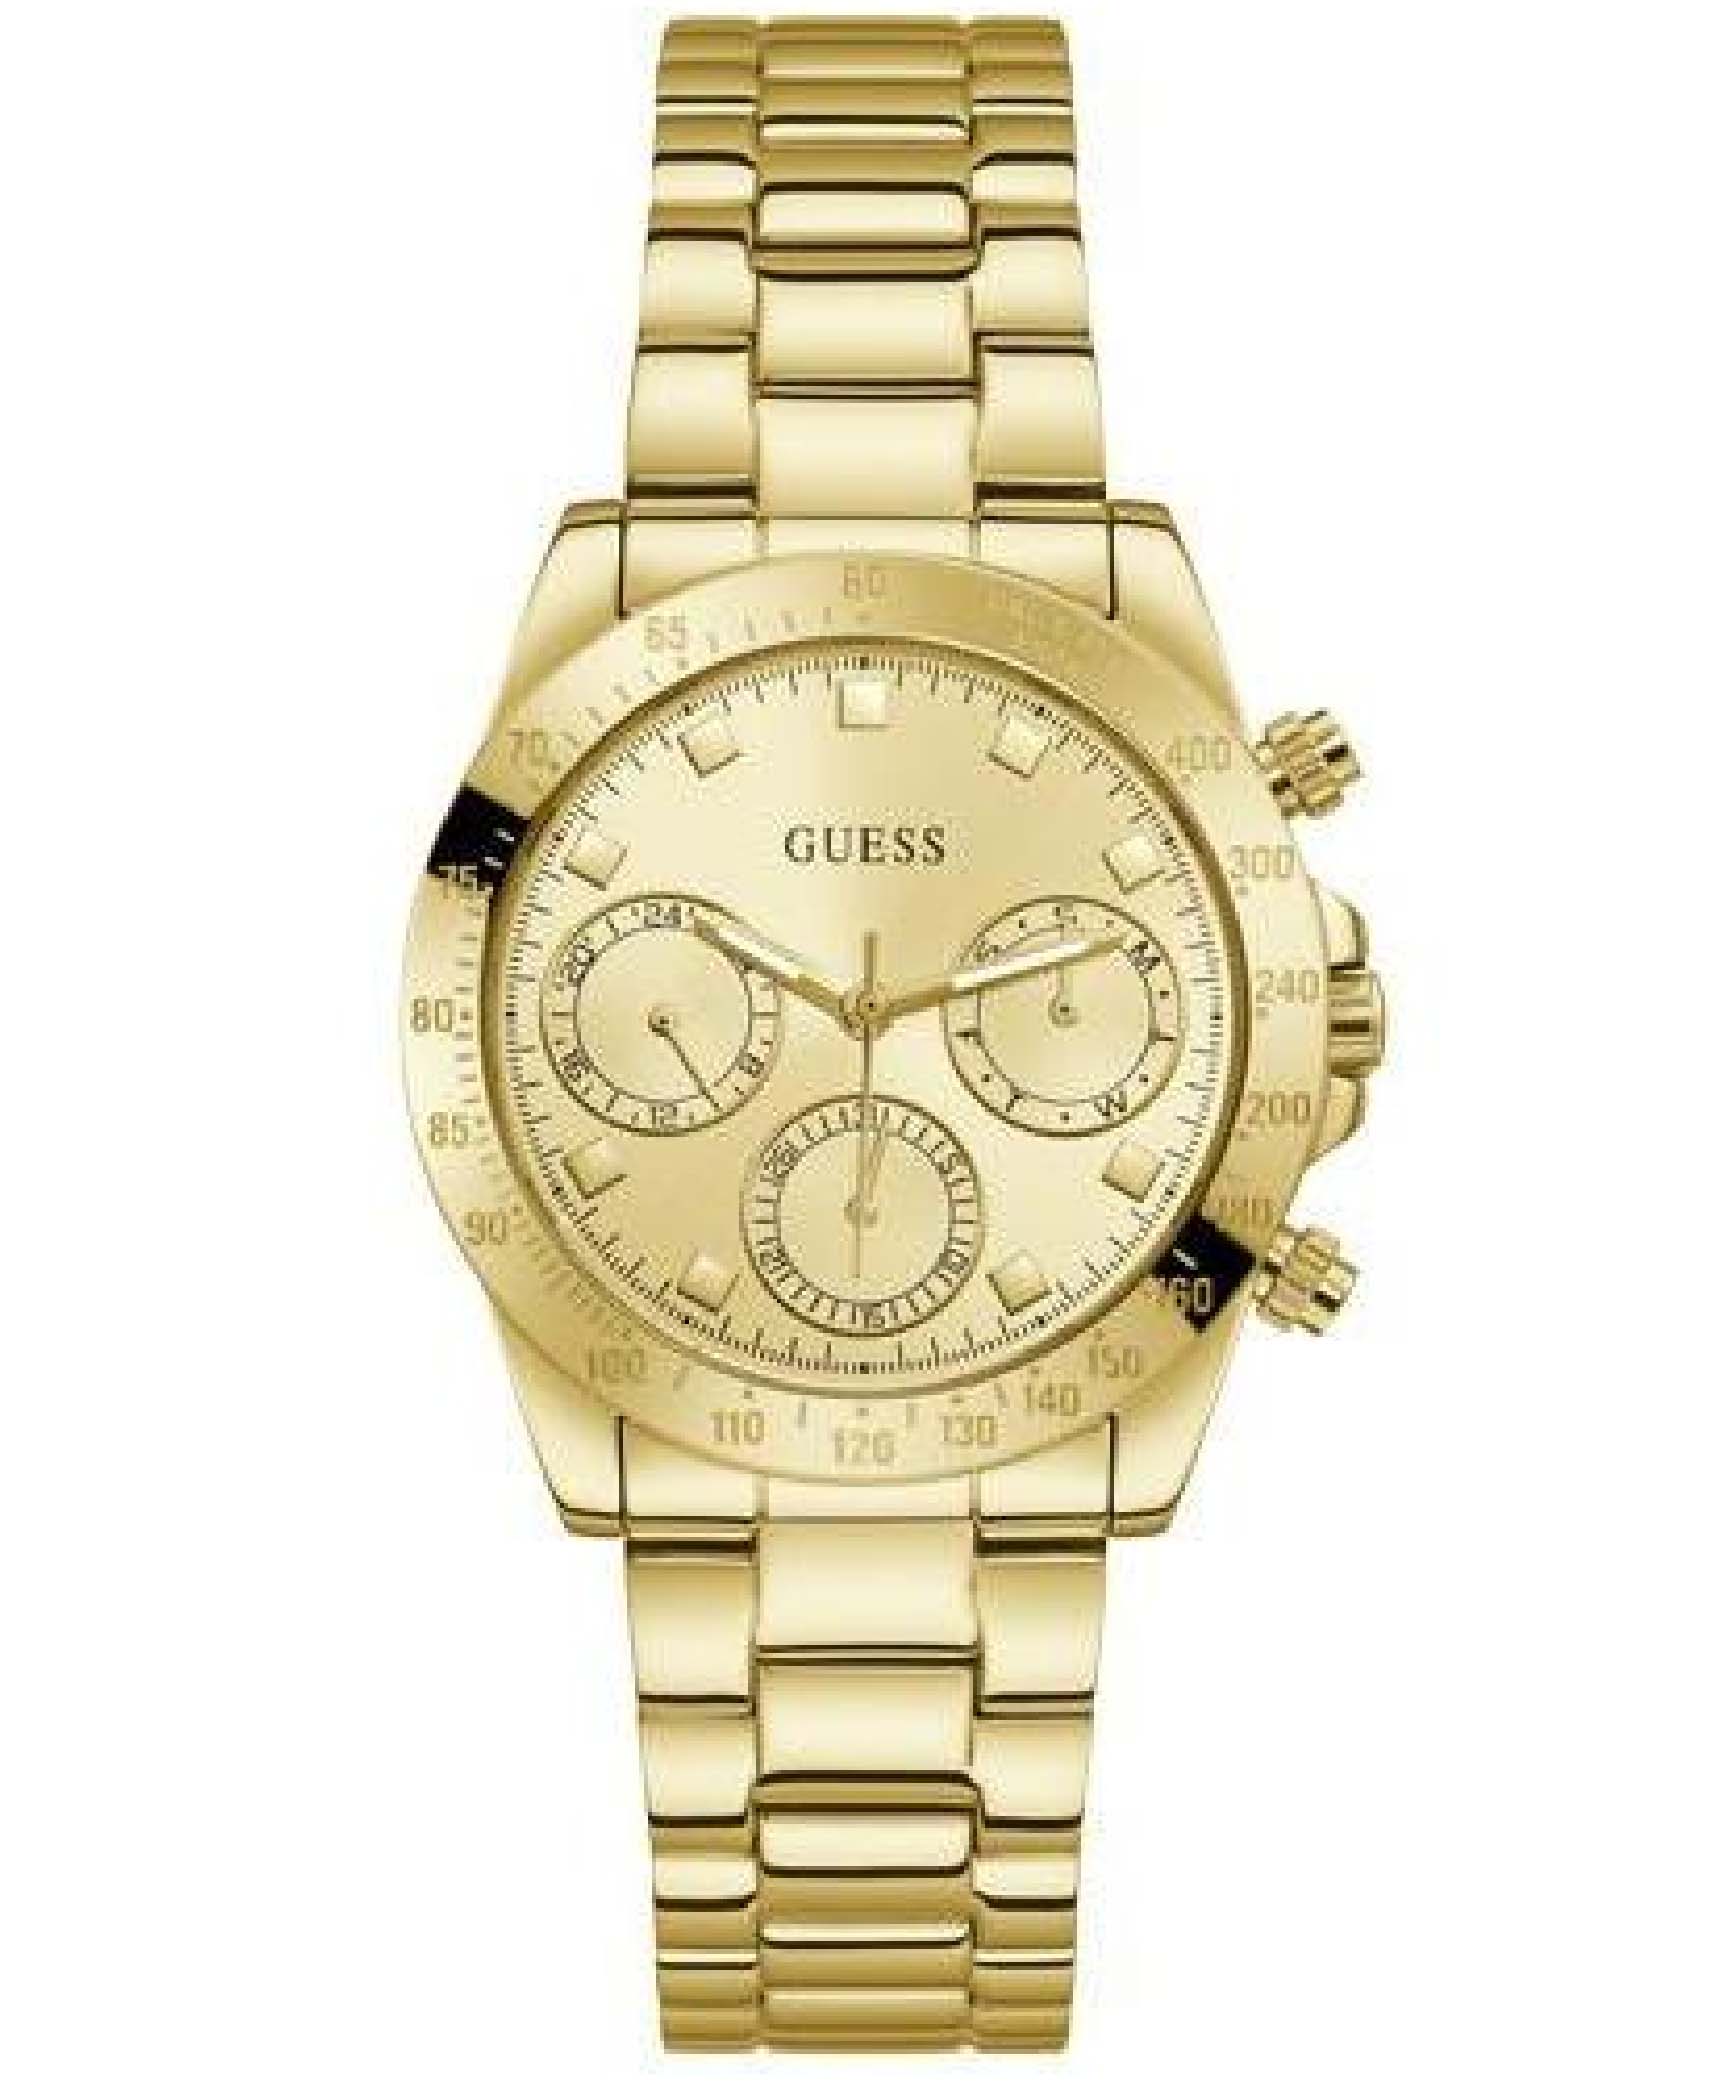 Guess, Women's Watch Analog, Gold Dial Gold Stainless Band, GW-W1293L2